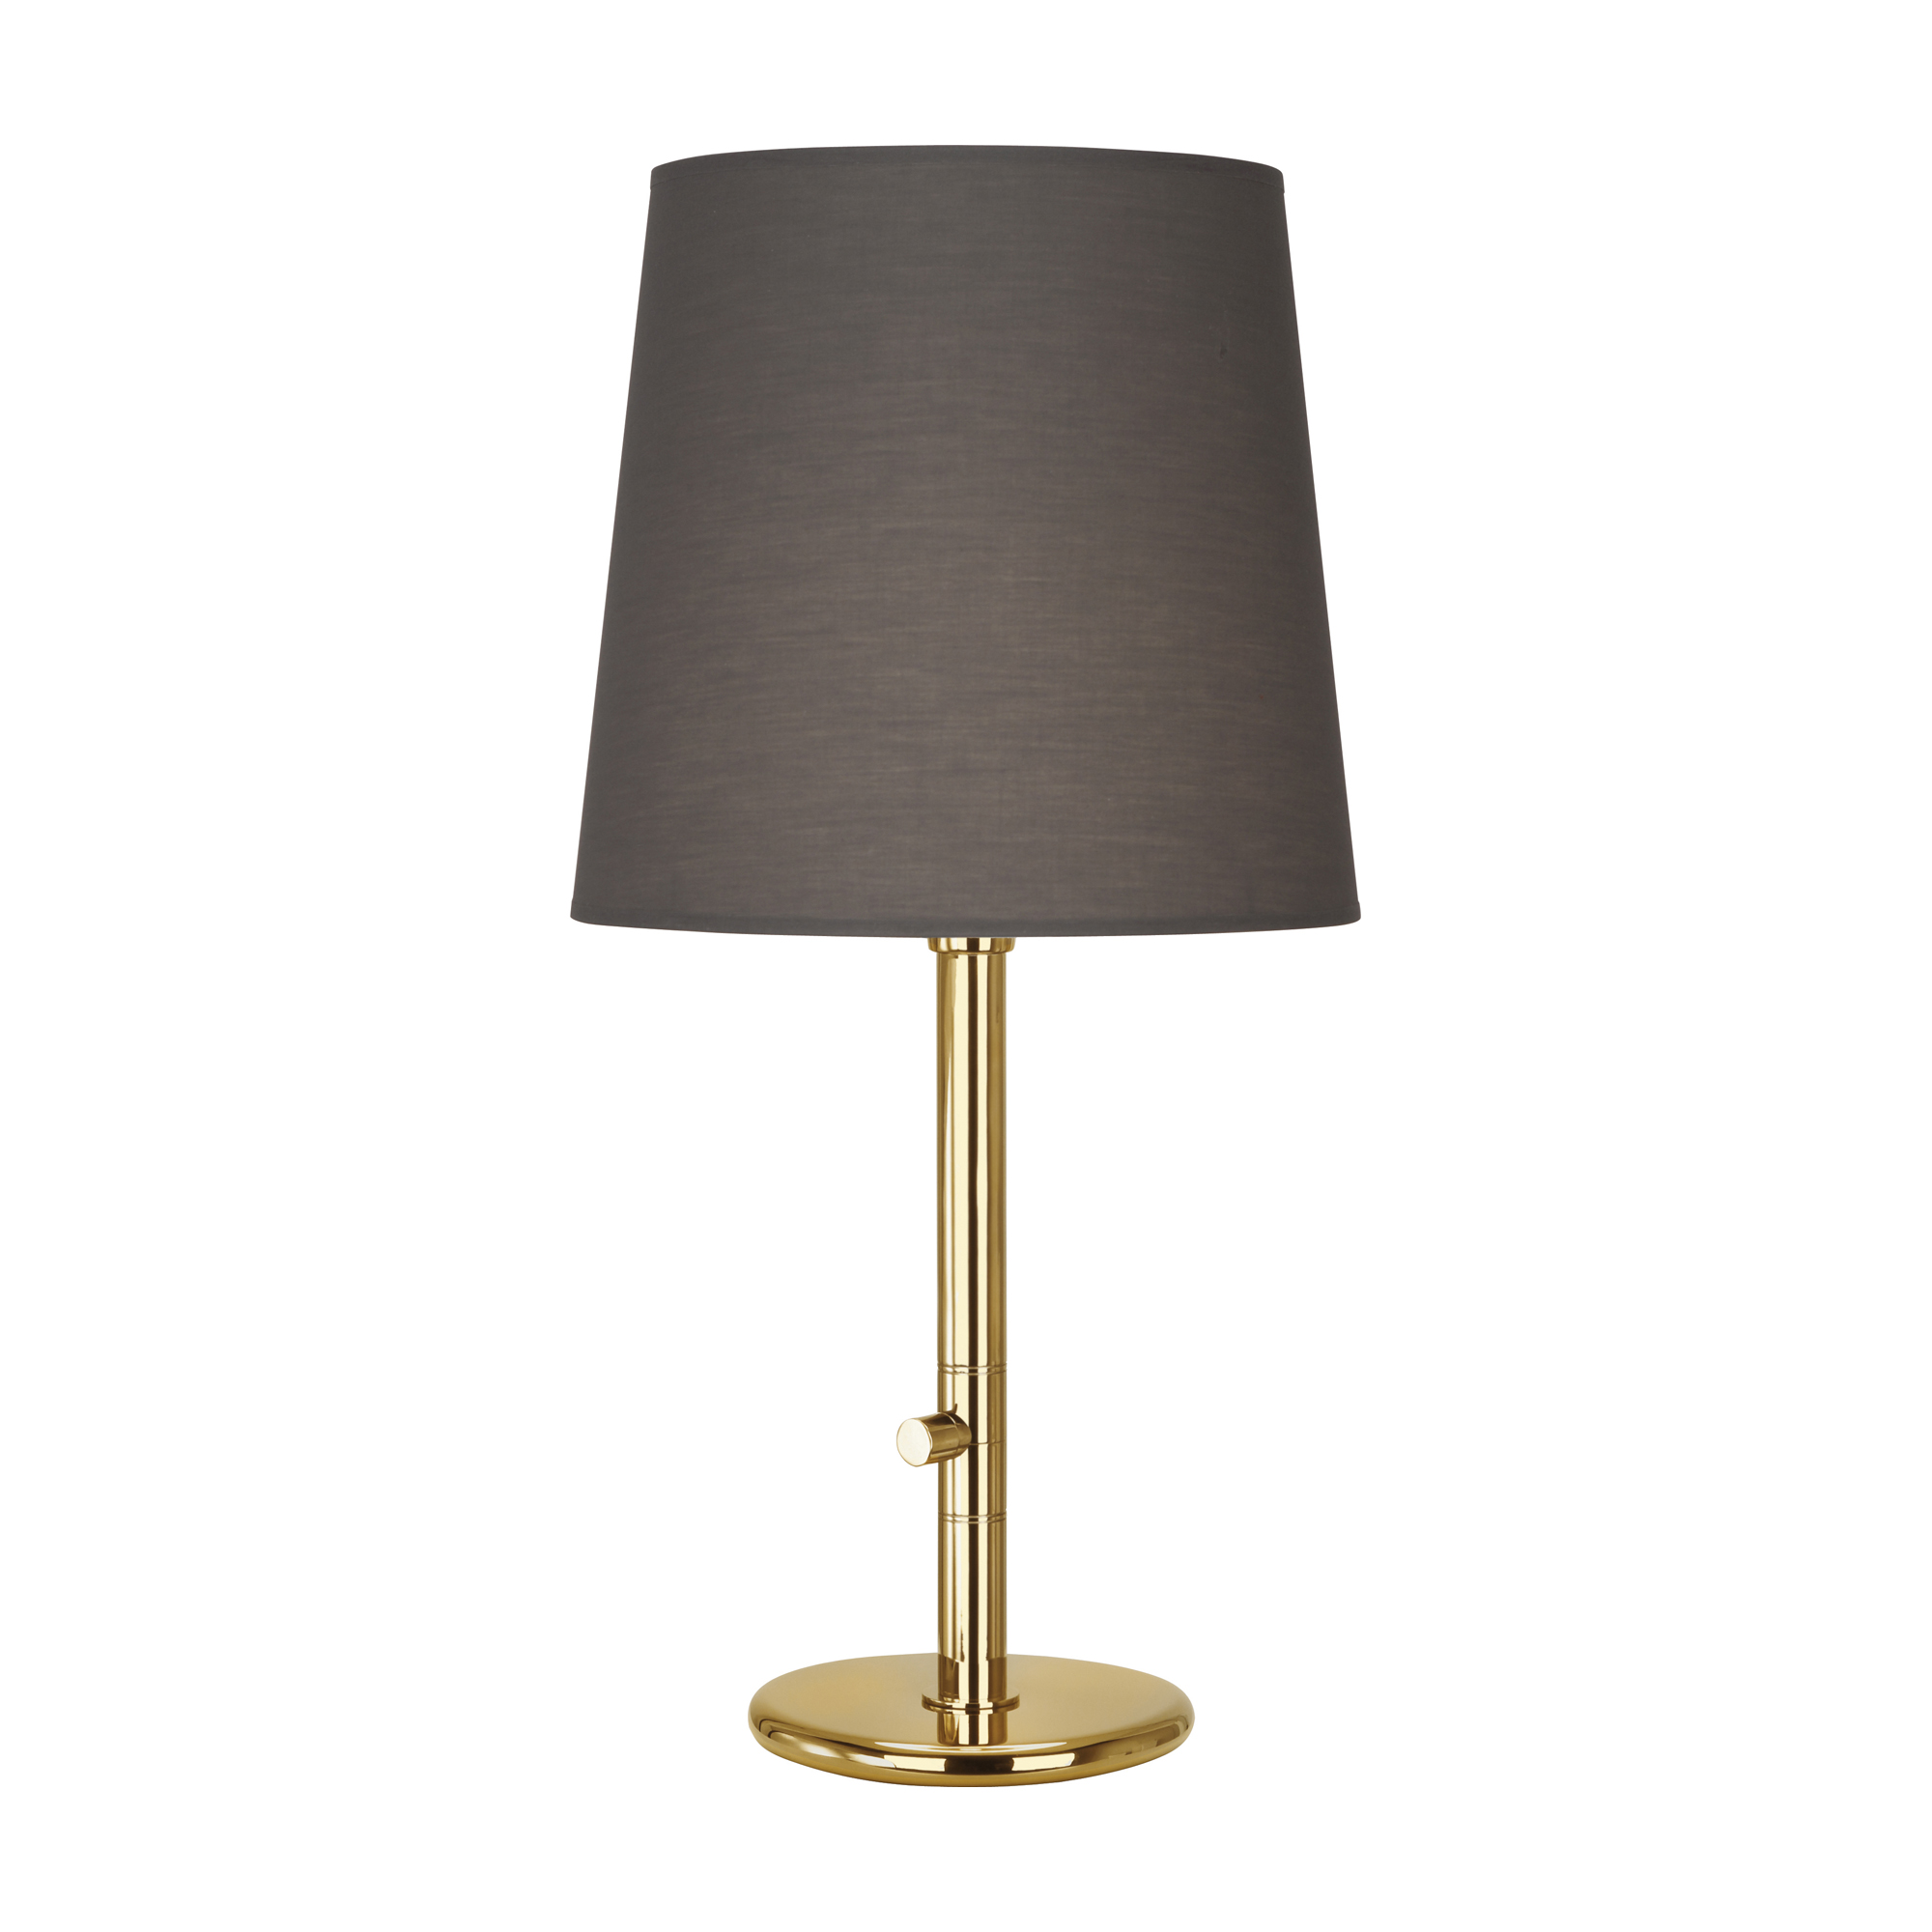 Rico Espinet Buster Chica Accent Lamp Style #2077